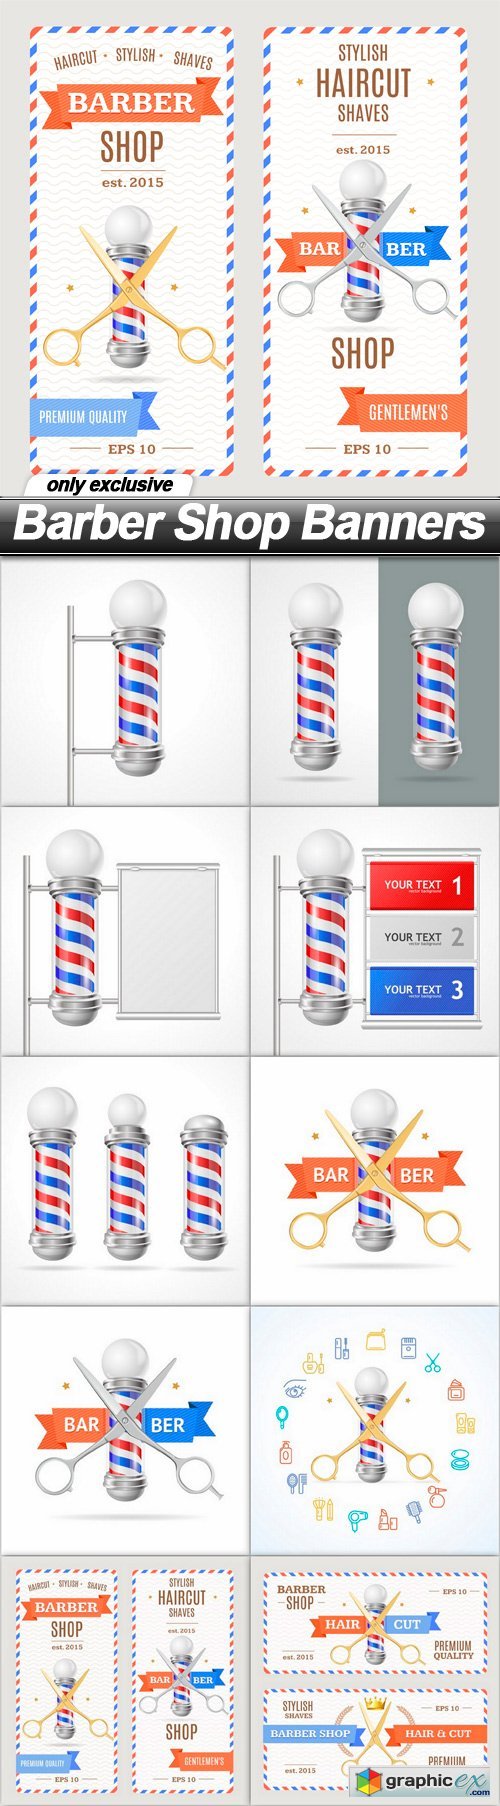 Barber Shop Banners - 10 EPS